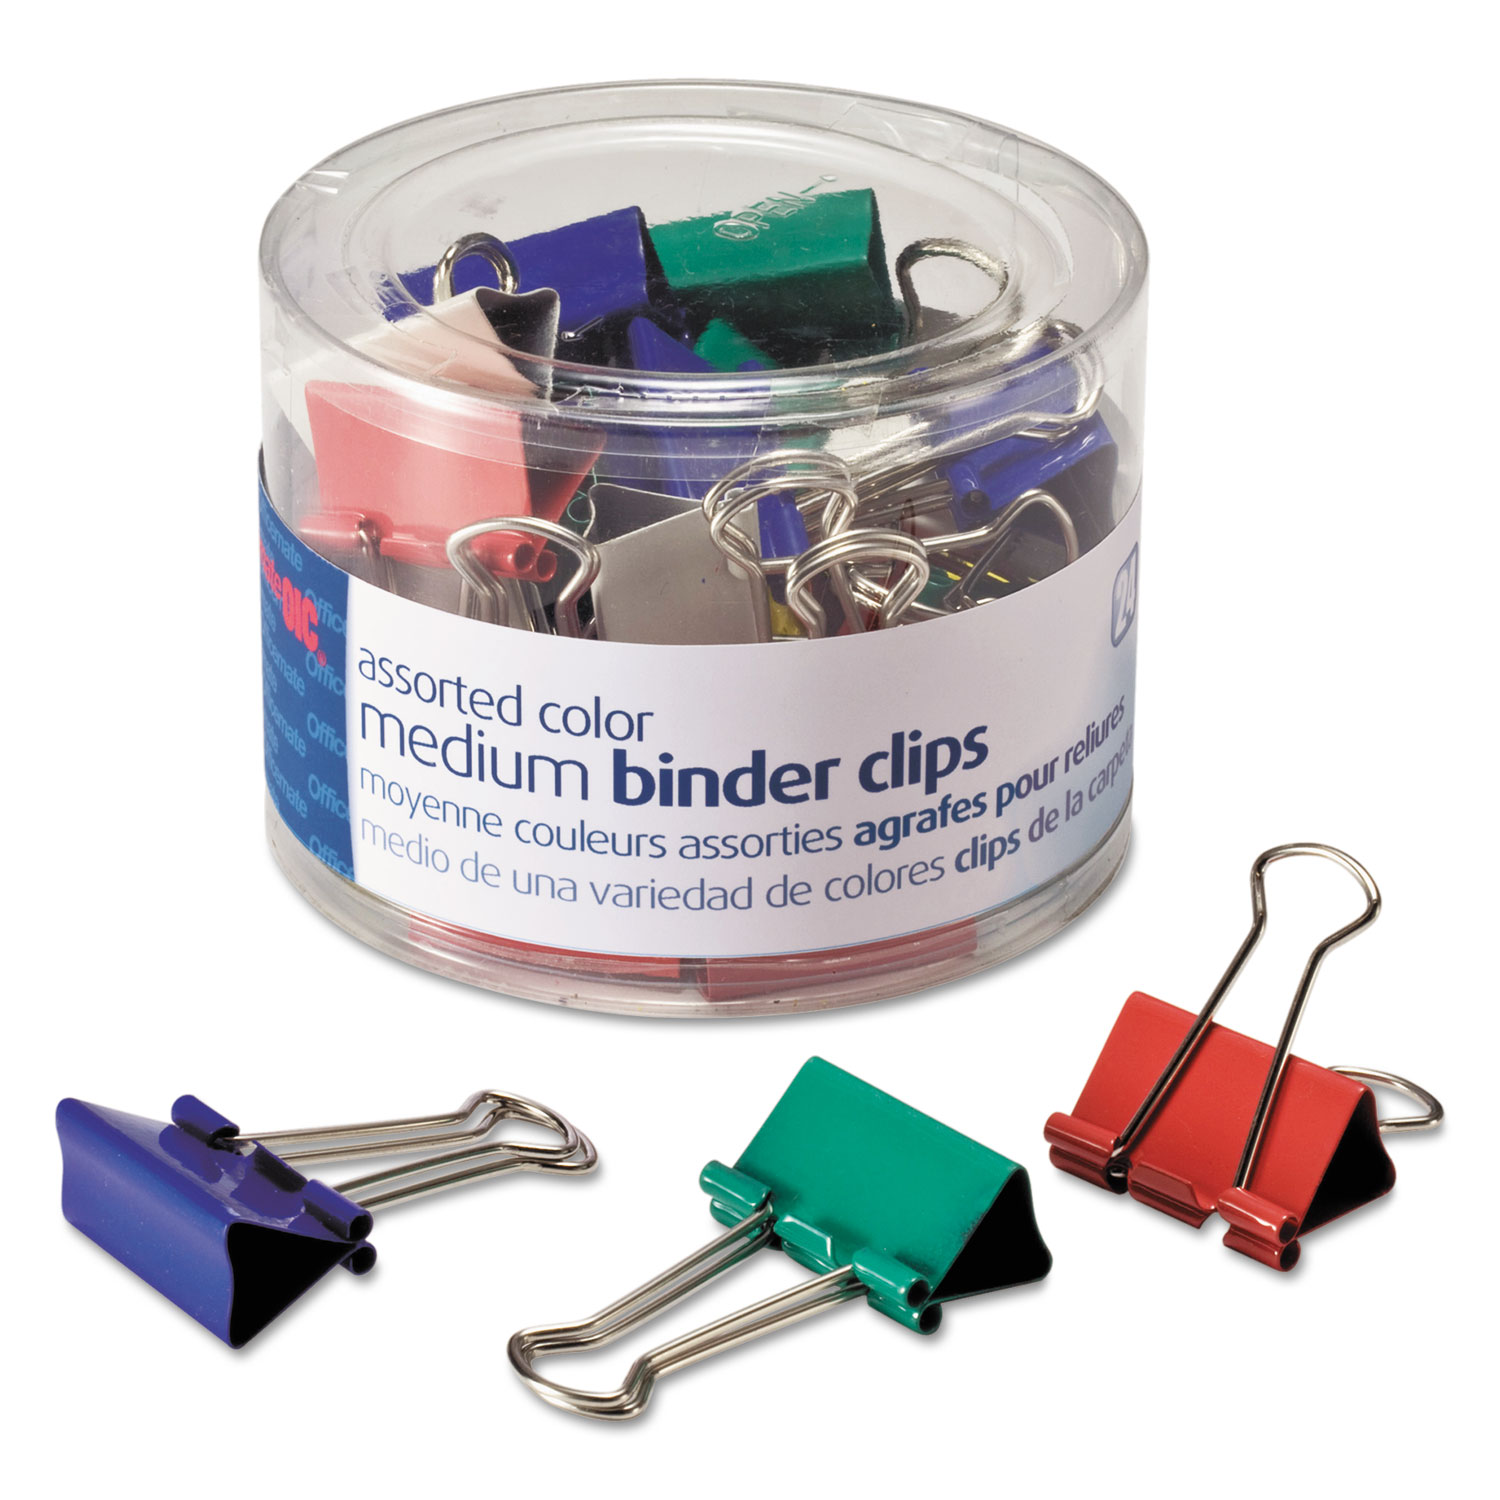  Officemate OIC-31029 Assorted Colors Binder Clips, Medium, 24/Pack (OIC31029) 